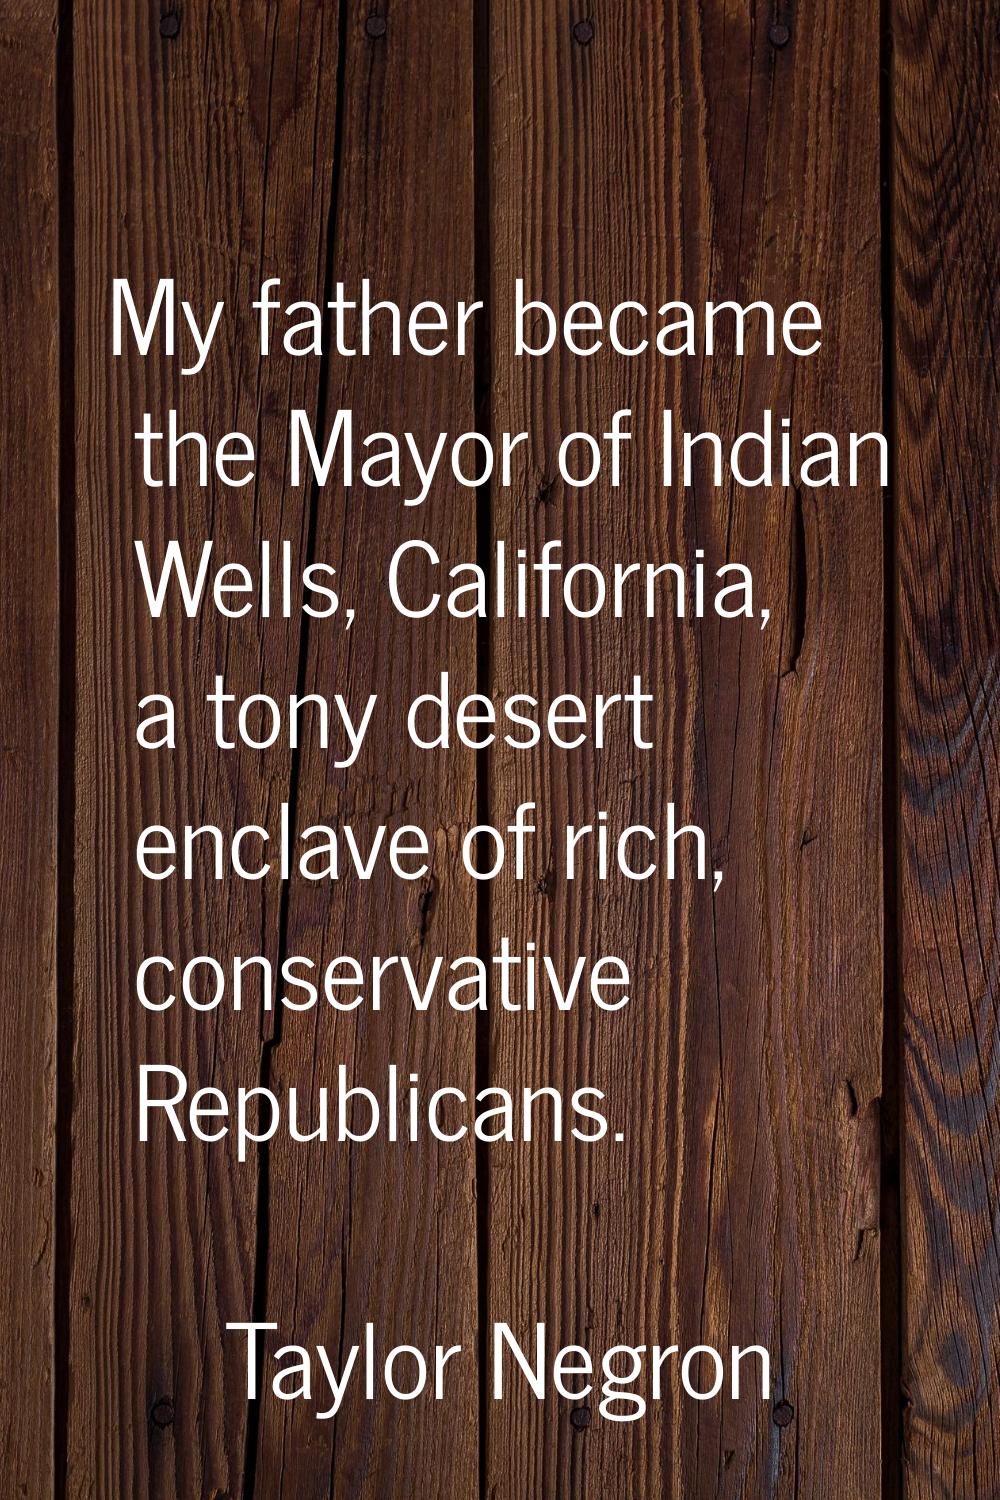 My father became the Mayor of Indian Wells, California, a tony desert enclave of rich, conservative